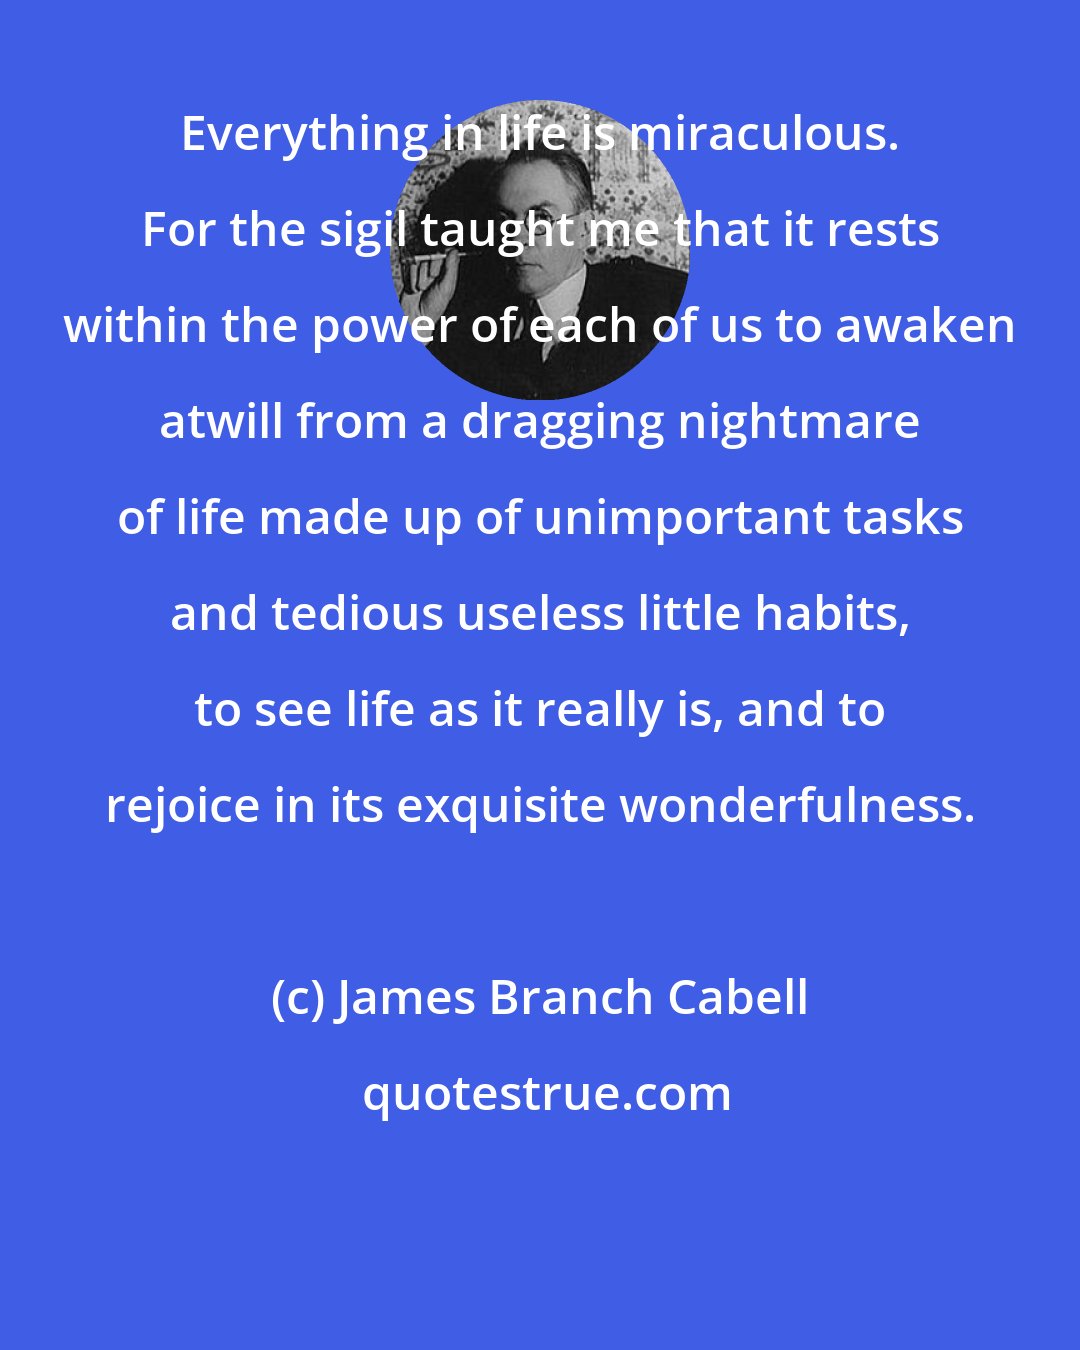 James Branch Cabell: Everything in life is miraculous. For the sigil taught me that it rests within the power of each of us to awaken atwill from a dragging nightmare of life made up of unimportant tasks and tedious useless little habits, to see life as it really is, and to rejoice in its exquisite wonderfulness.